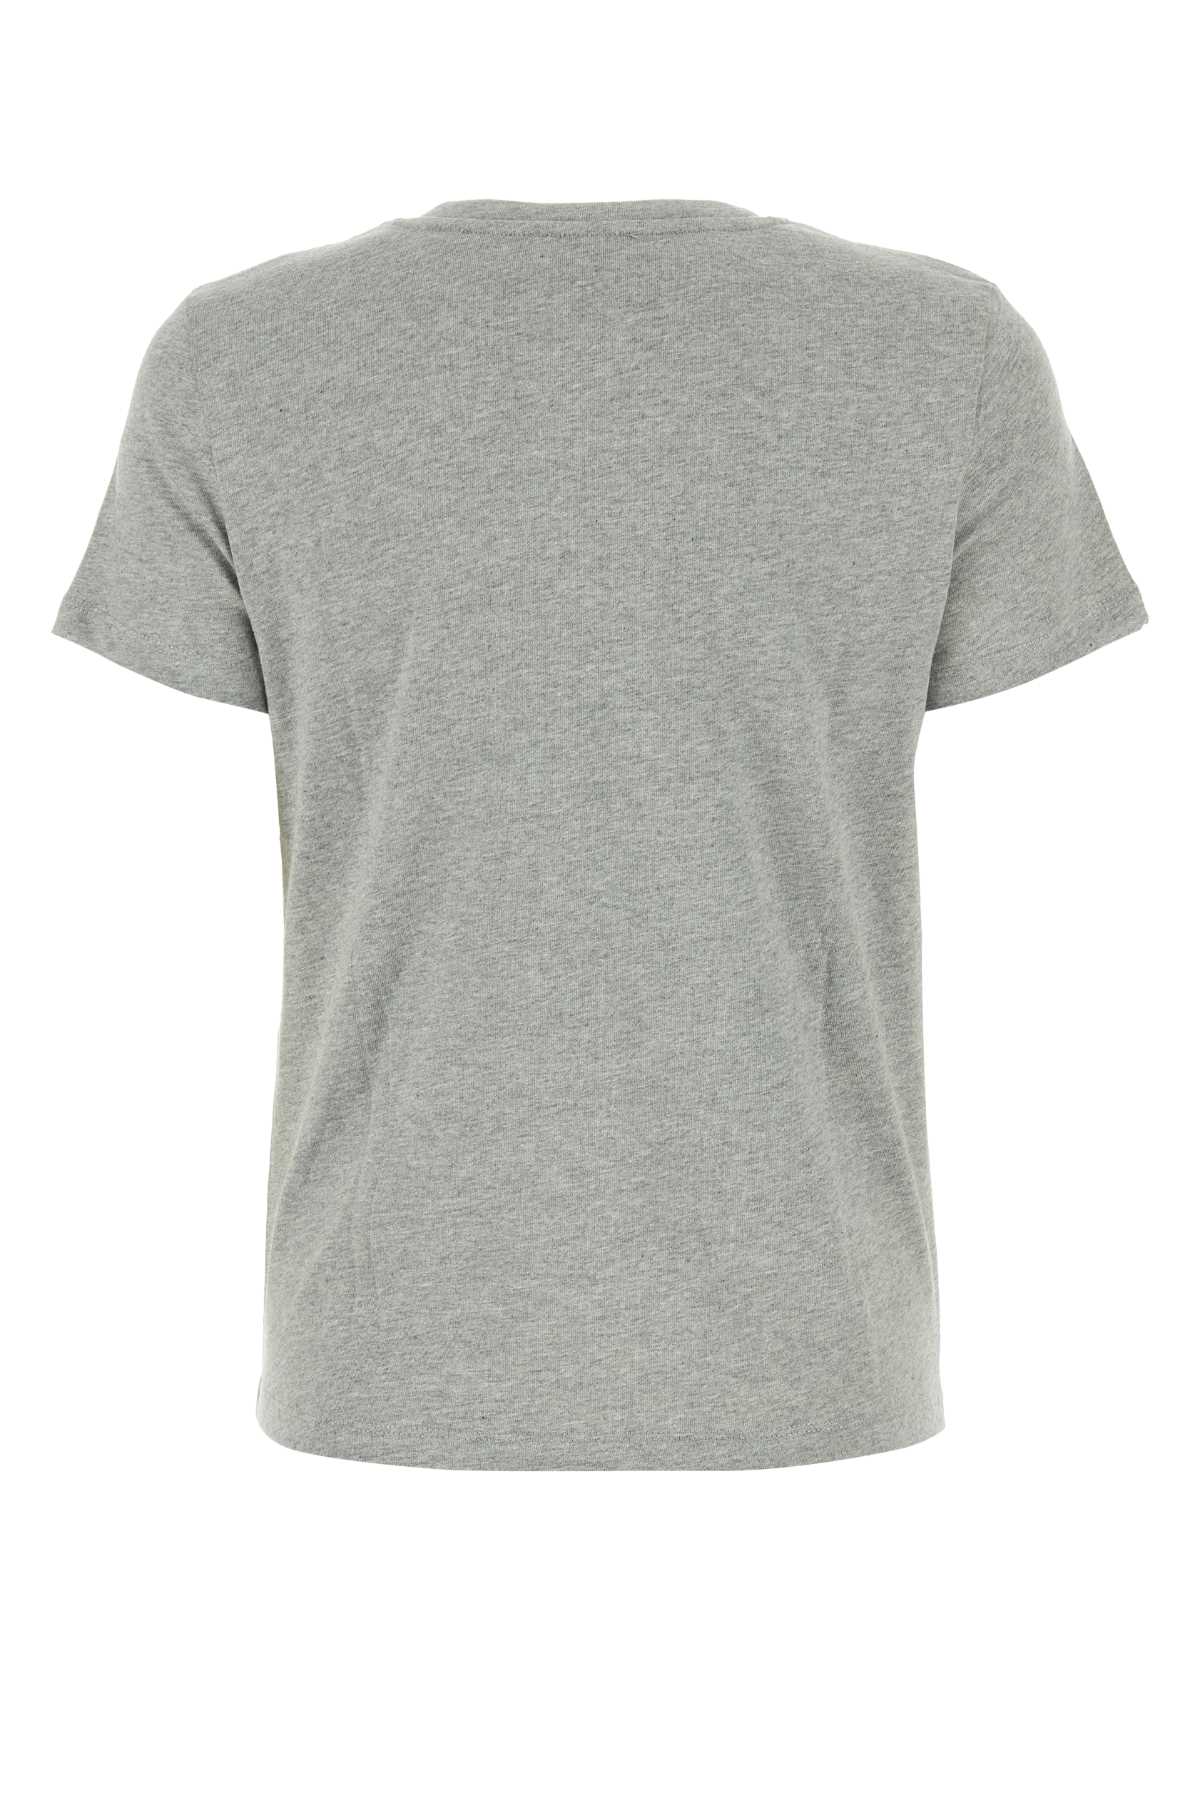 Apc Grey Cotton Vpc T-shirt In Grisclairchinerouge